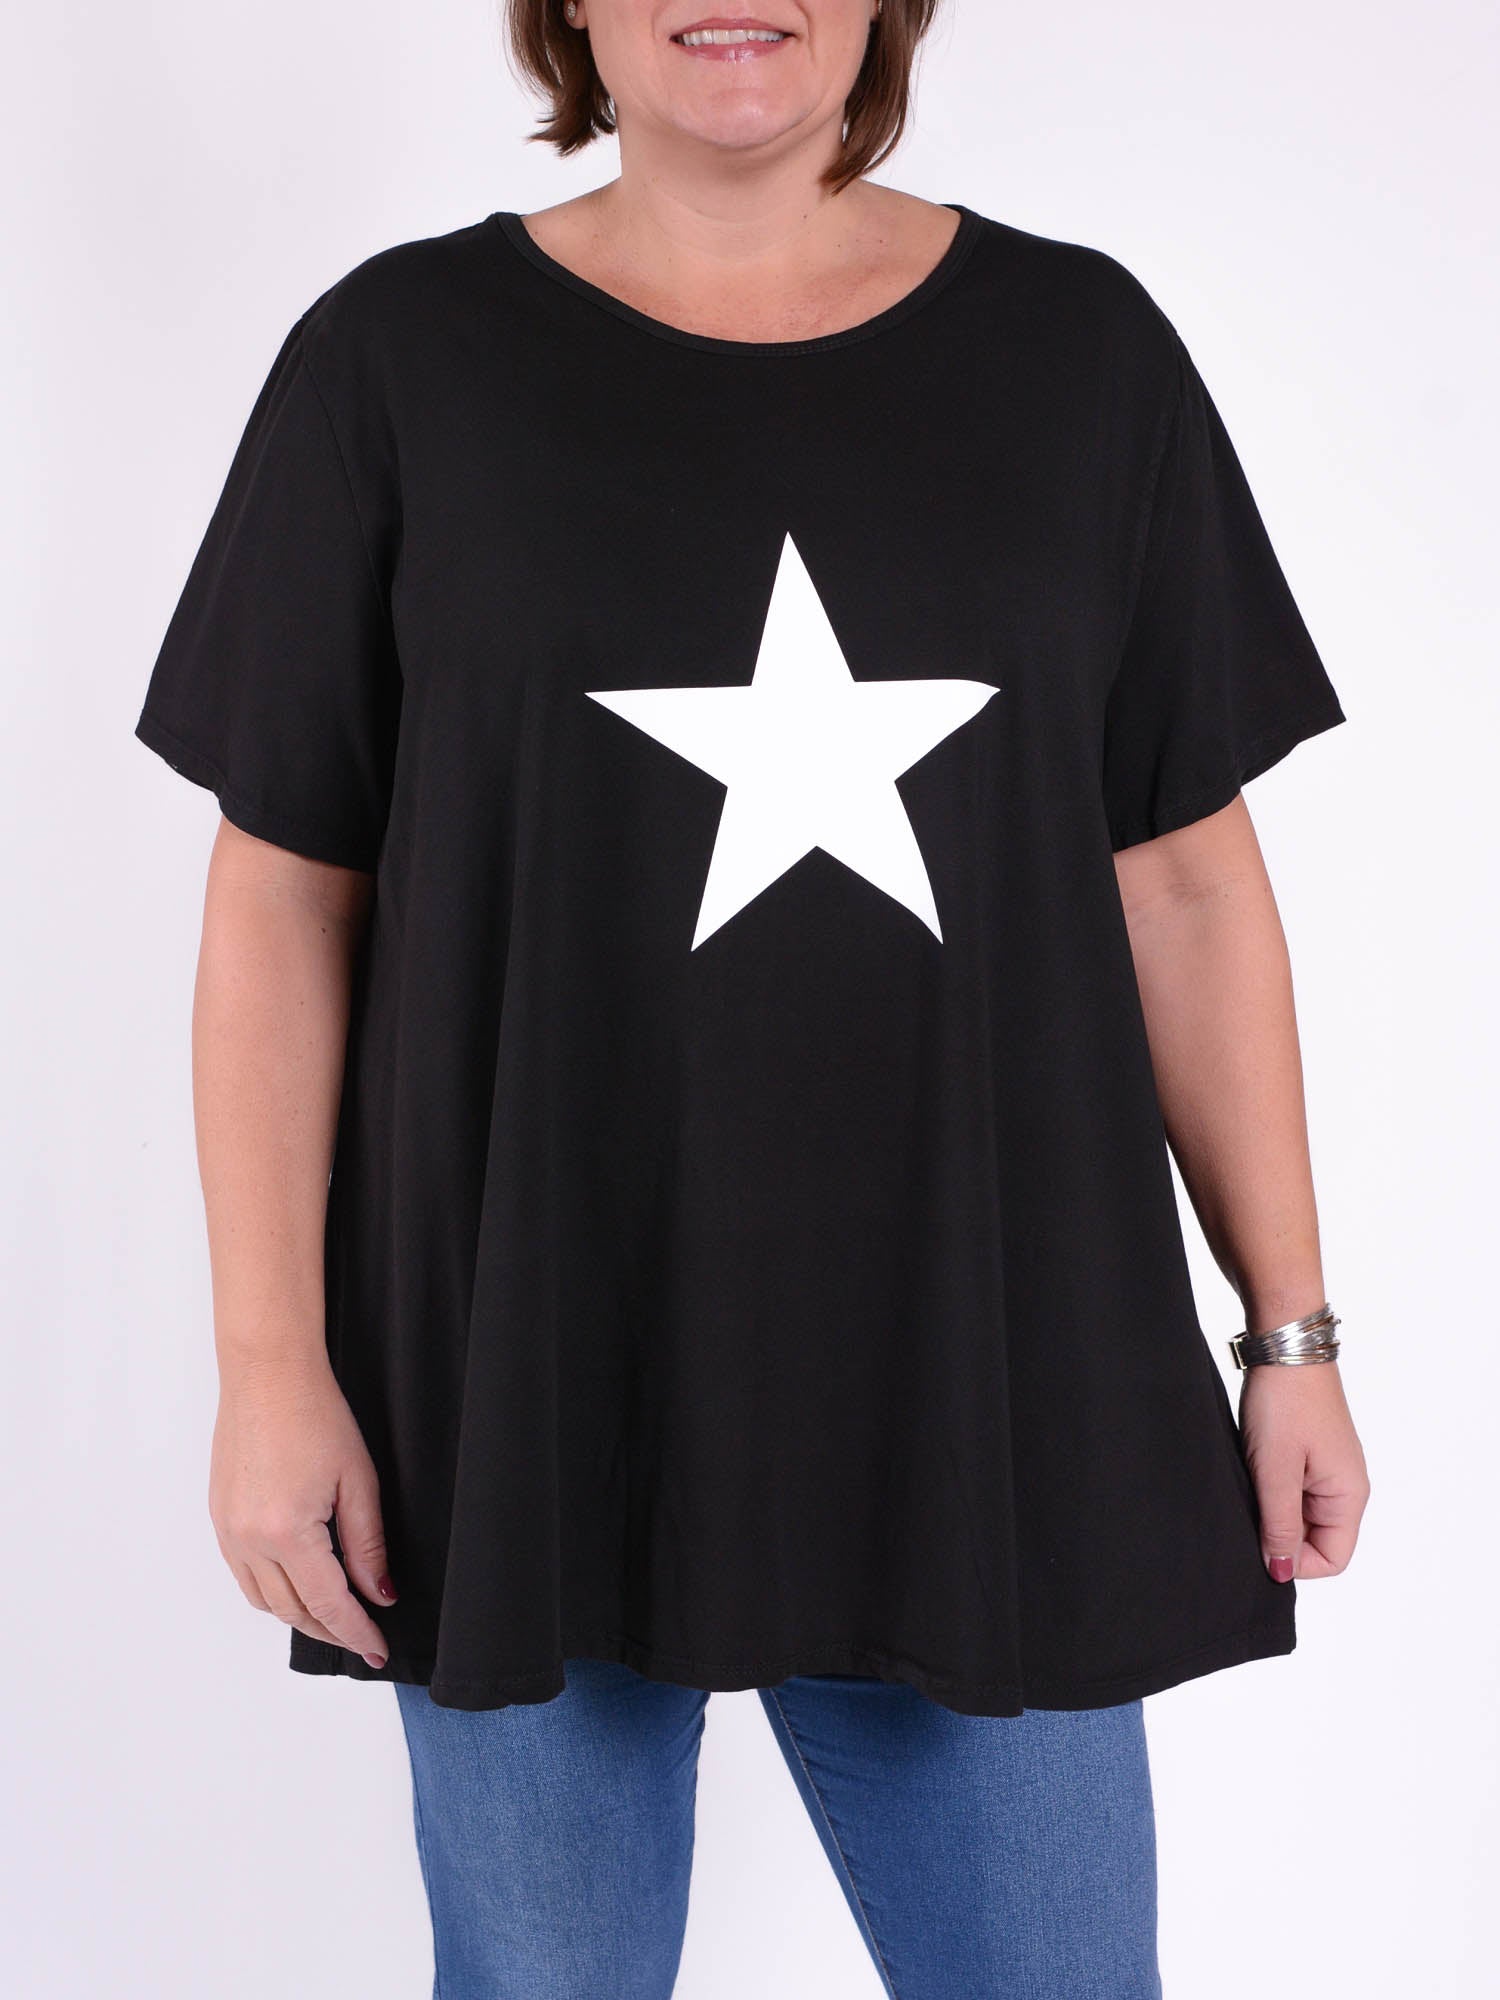 Cotton Short Sleeve Swing T Shirt - 10516 STAR, Tops & Shirts, Pure Plus Clothing, Lagenlook Clothing, Plus Size Fashion, Over 50 Fashion